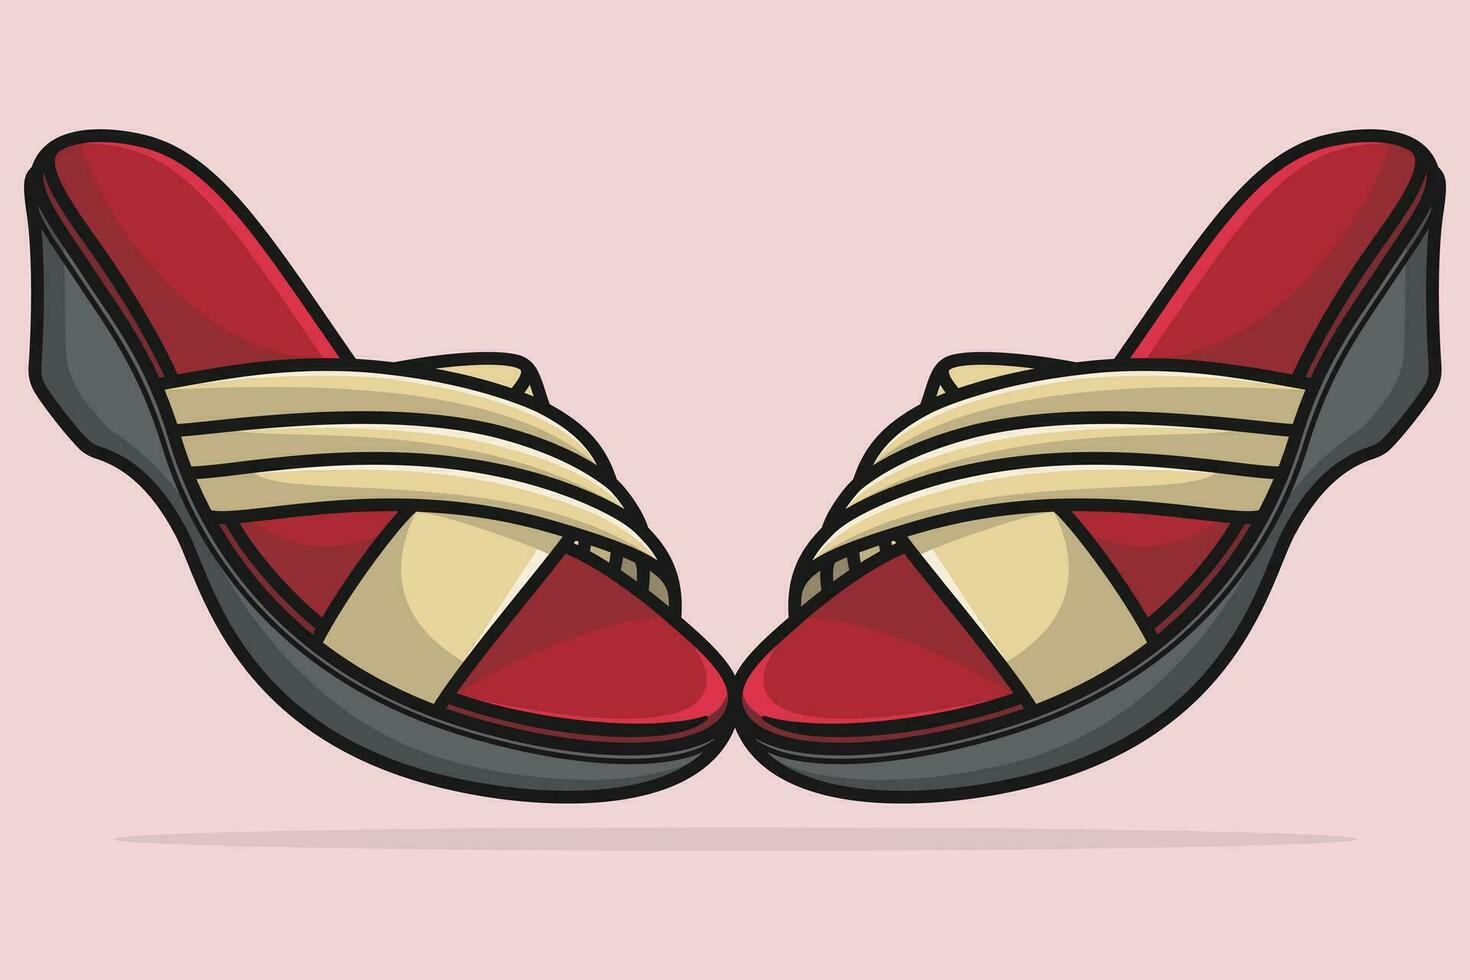 Pair Of Stylish Women Feet Wearing Slipper vector illustration. Beauty fashion objects icon concept. Female colorful unique style slipper shoes pair vector design.